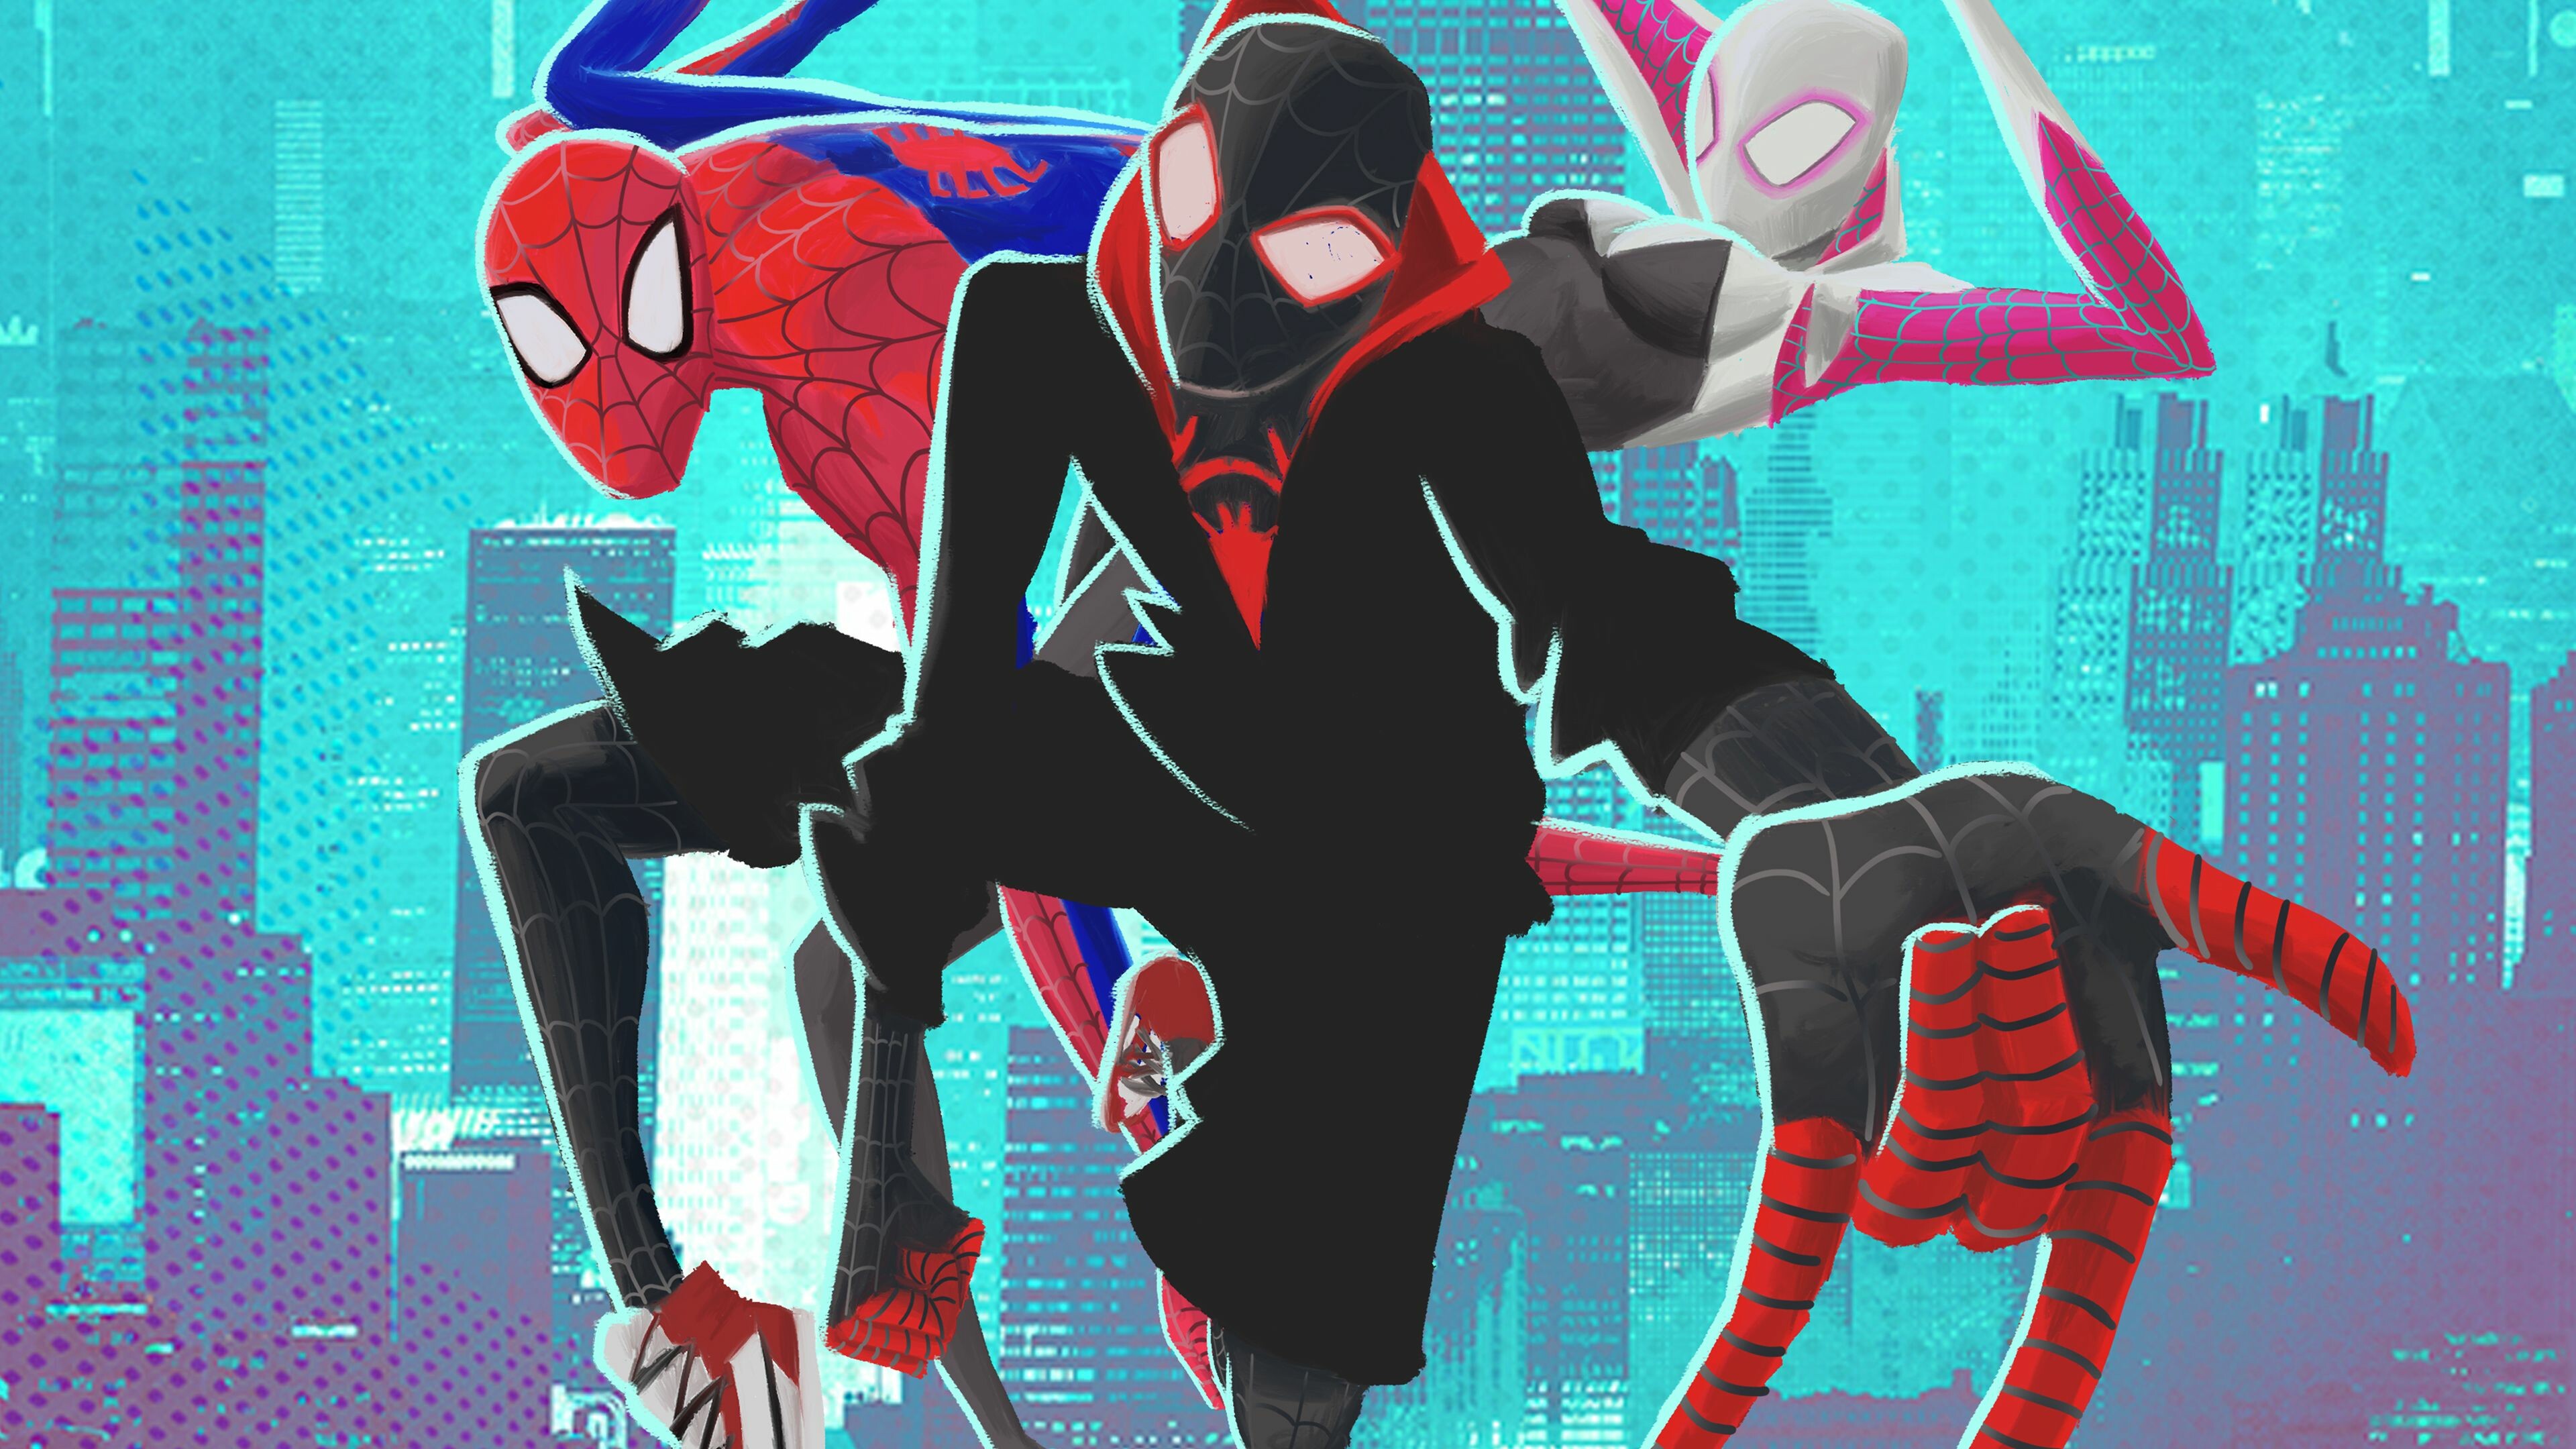 Spider-Man: Across the Spider-Verse - Part One: The film directed by Joaquim Dos Santos, Kemp Powers, and Justin K. Thompson, Marvel superhero. 3840x2160 4K Wallpaper.